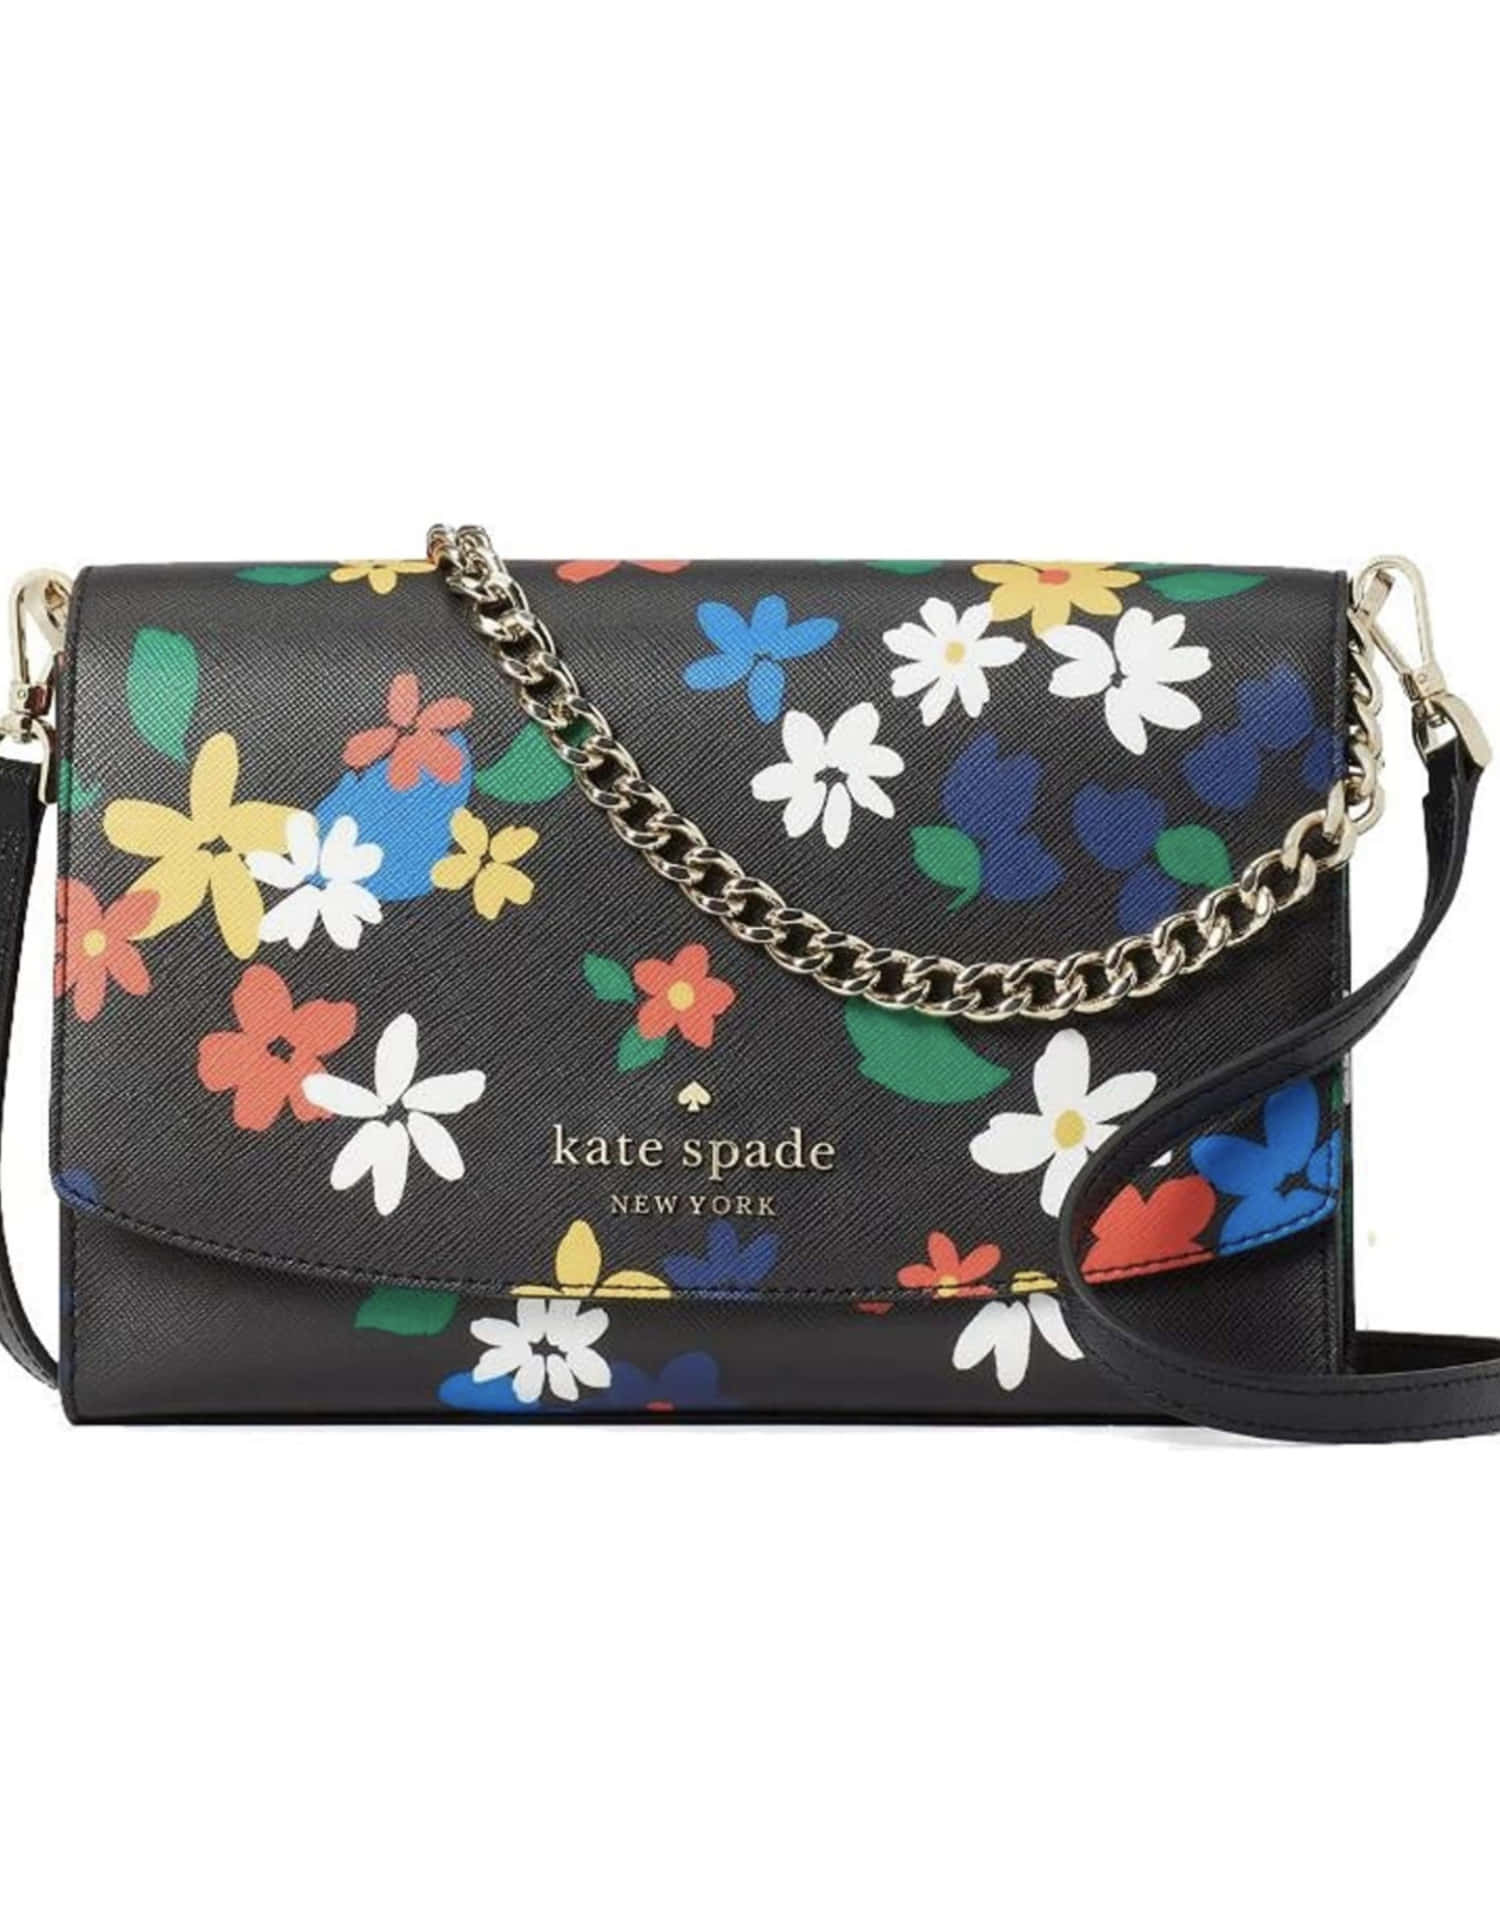 Classic Kate Spade Style